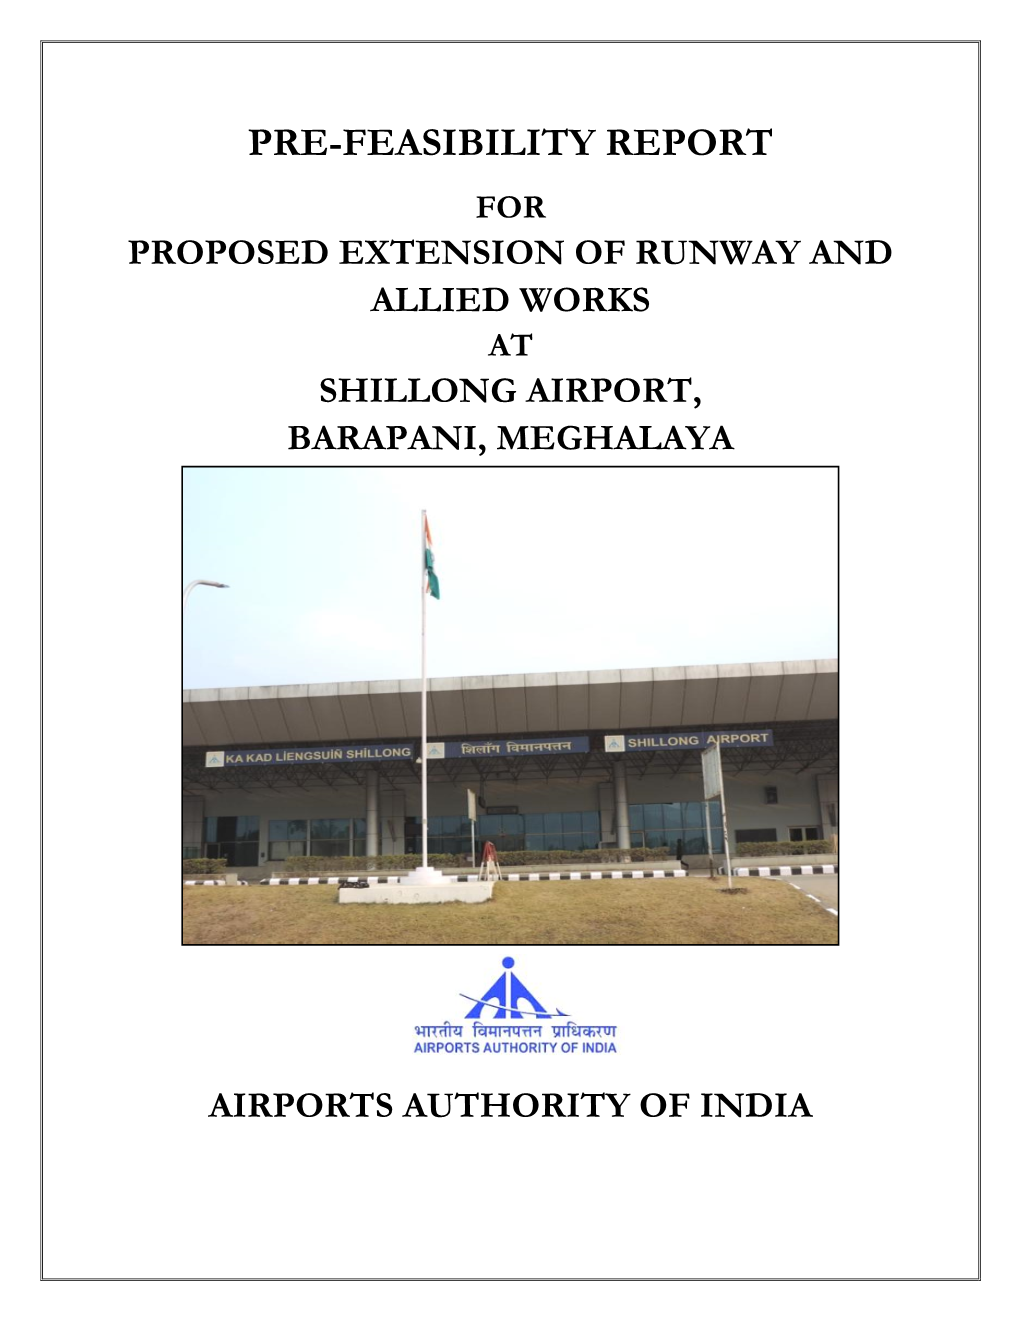 Pre-Feasibility Report for Proposed Extension of Runway and Allied Works at Shillong Airport, Barapani, Meghalaya